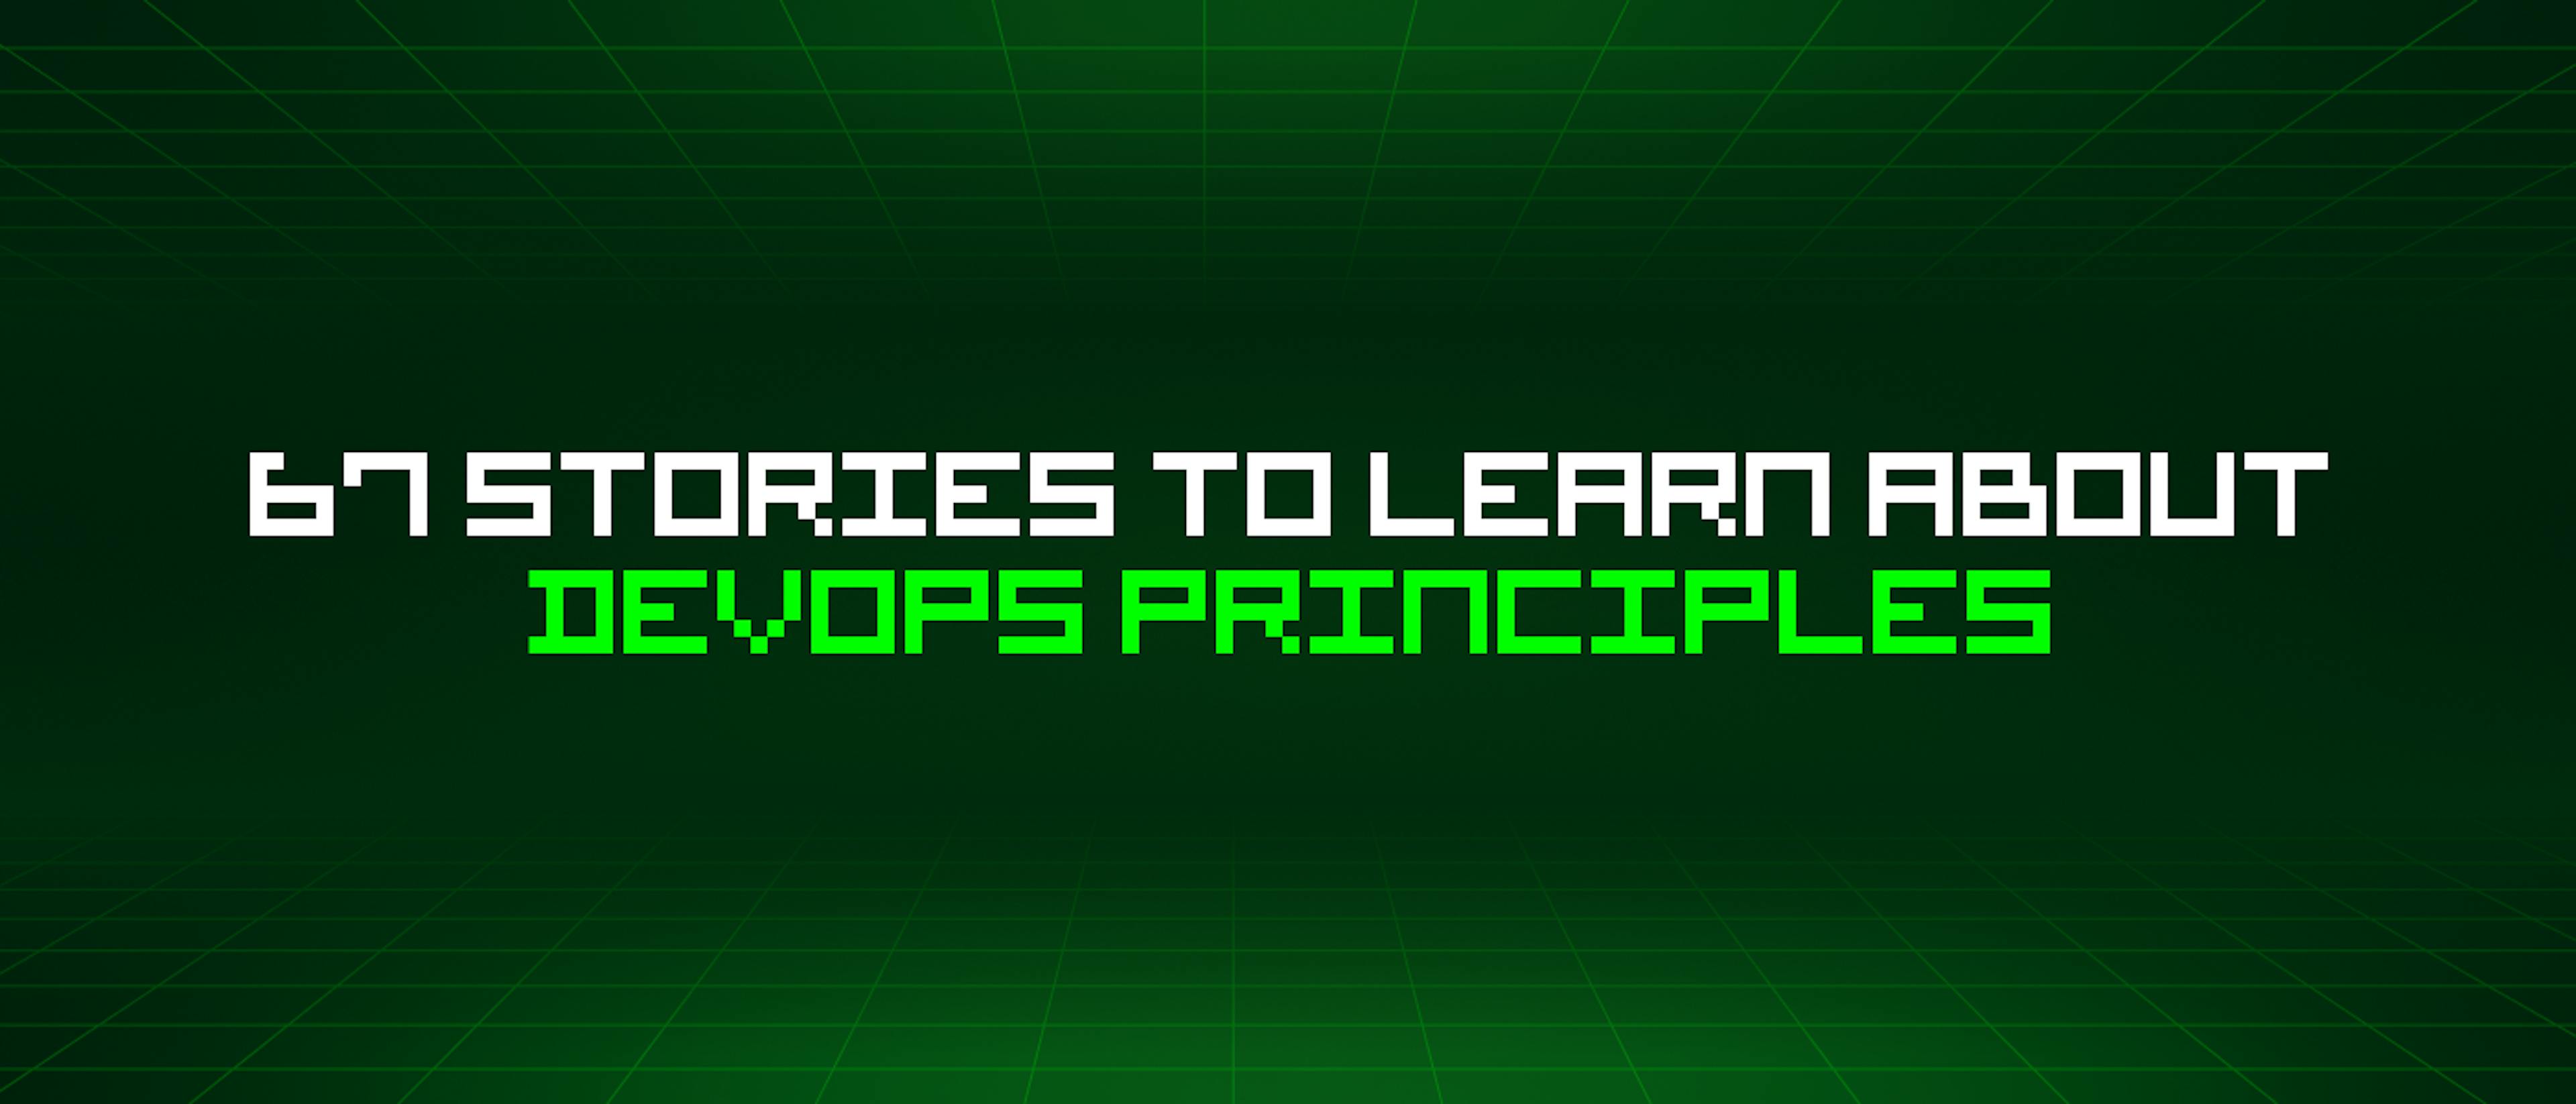 featured image - 67 Stories To Learn About Devops Principles